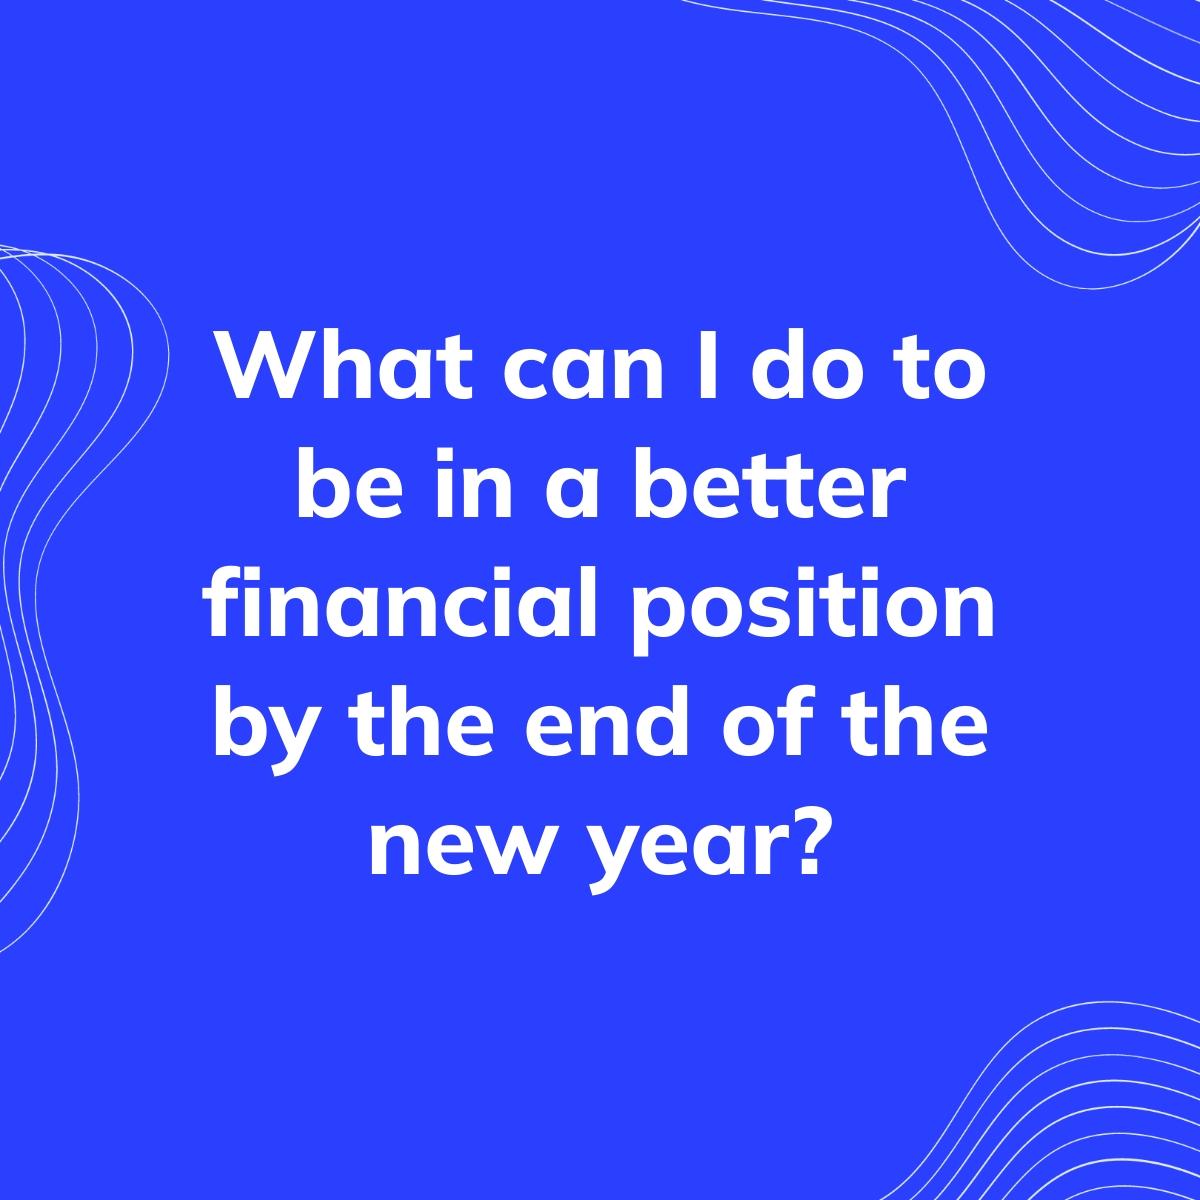 Journal Prompt: What can I do to be in a better financial position by the end of the new year?